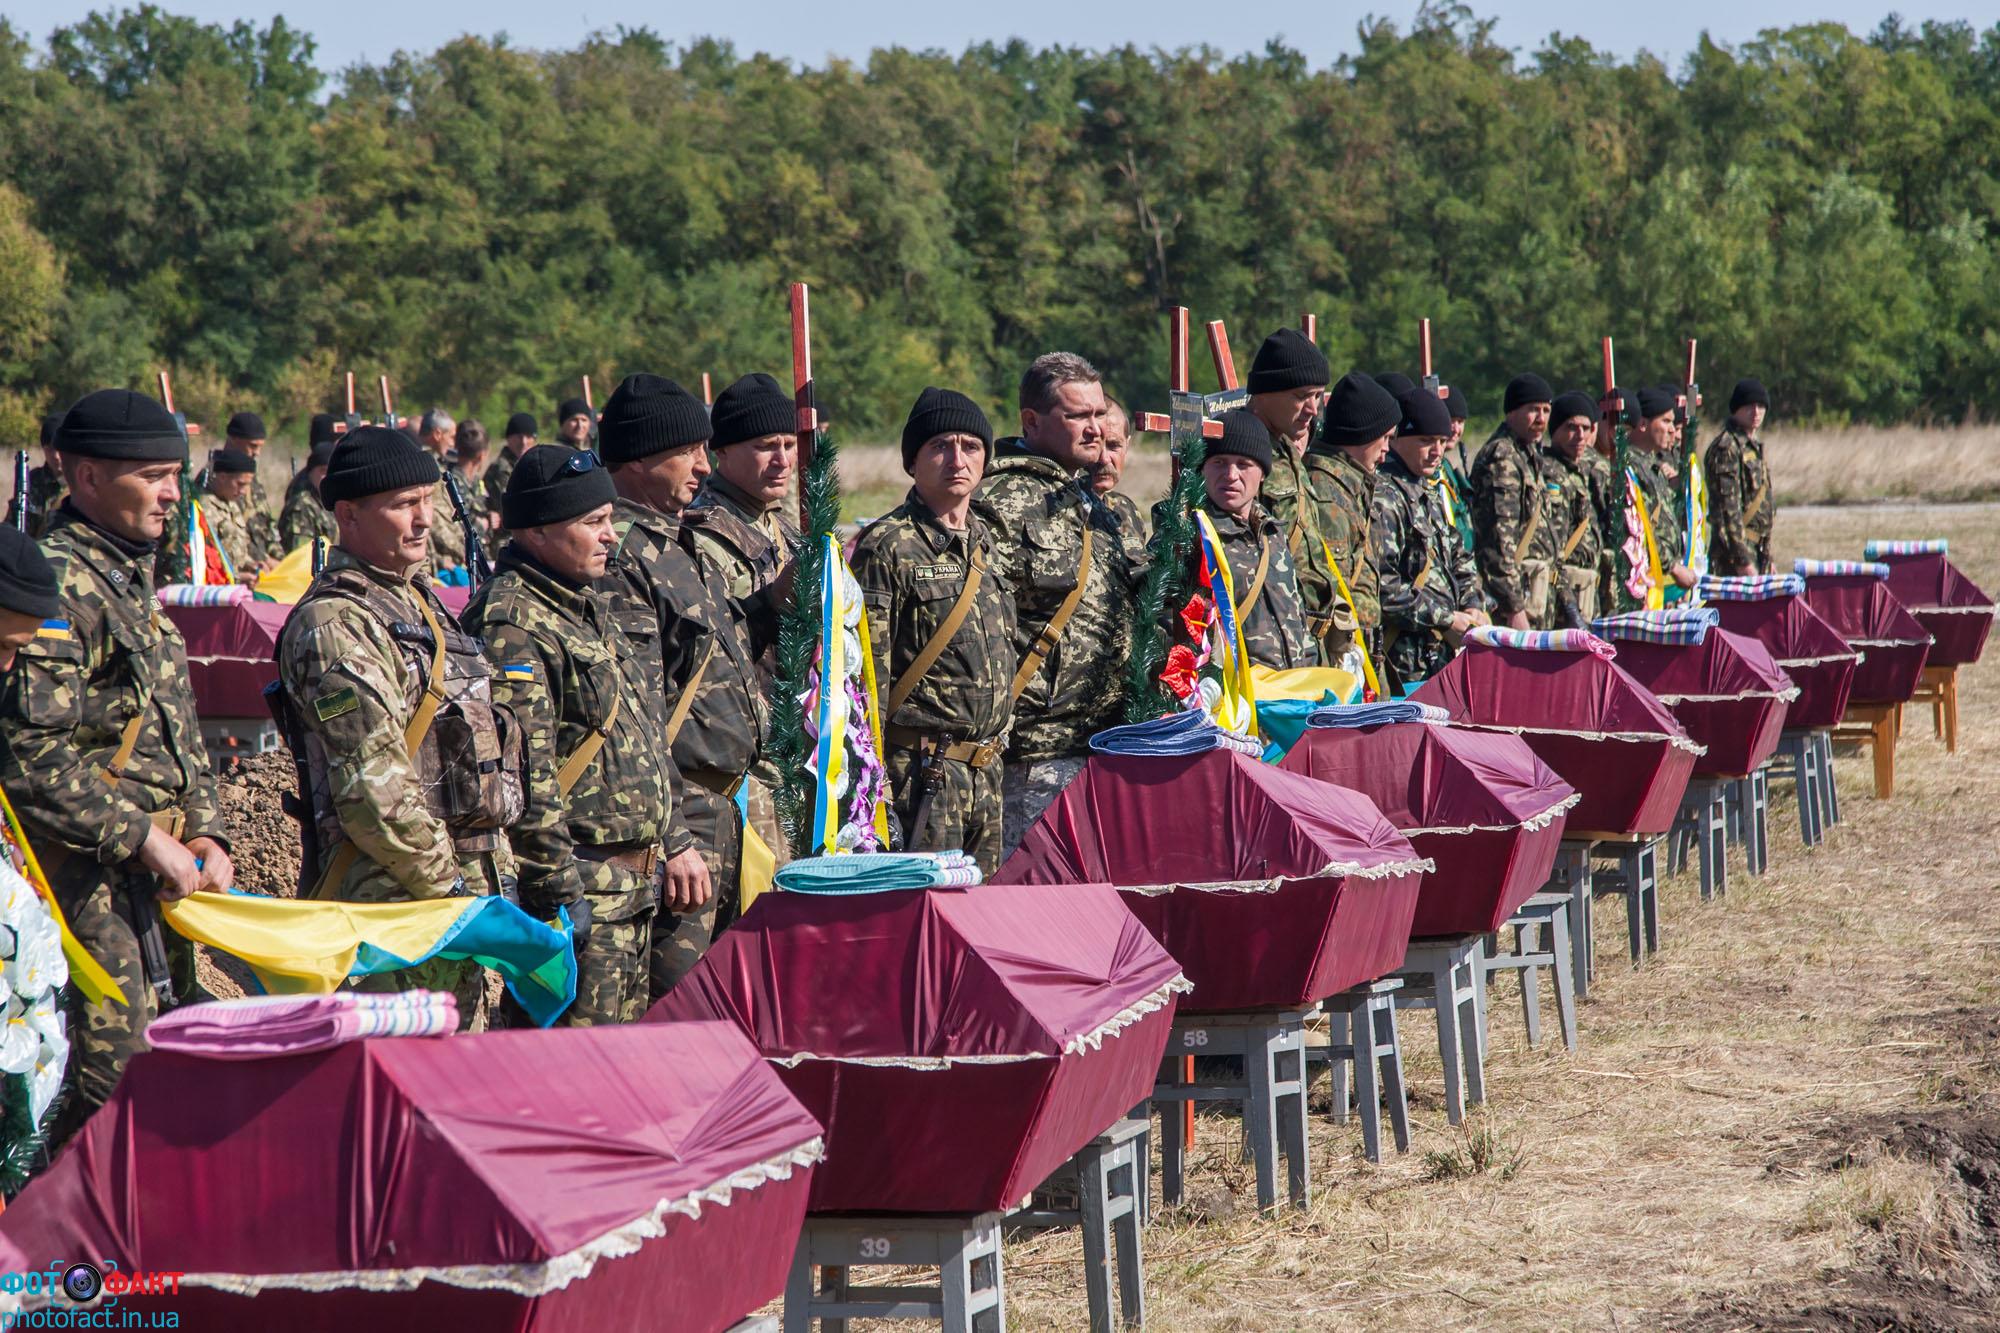 A funeral for unidentified soldiers killed in action liberating the Donbas region of Ukraine from the hybrid army of the Russian Federation. The funeral was held in the town of Kushugum, Zaphorizhze oblast, on October 1, 2014.